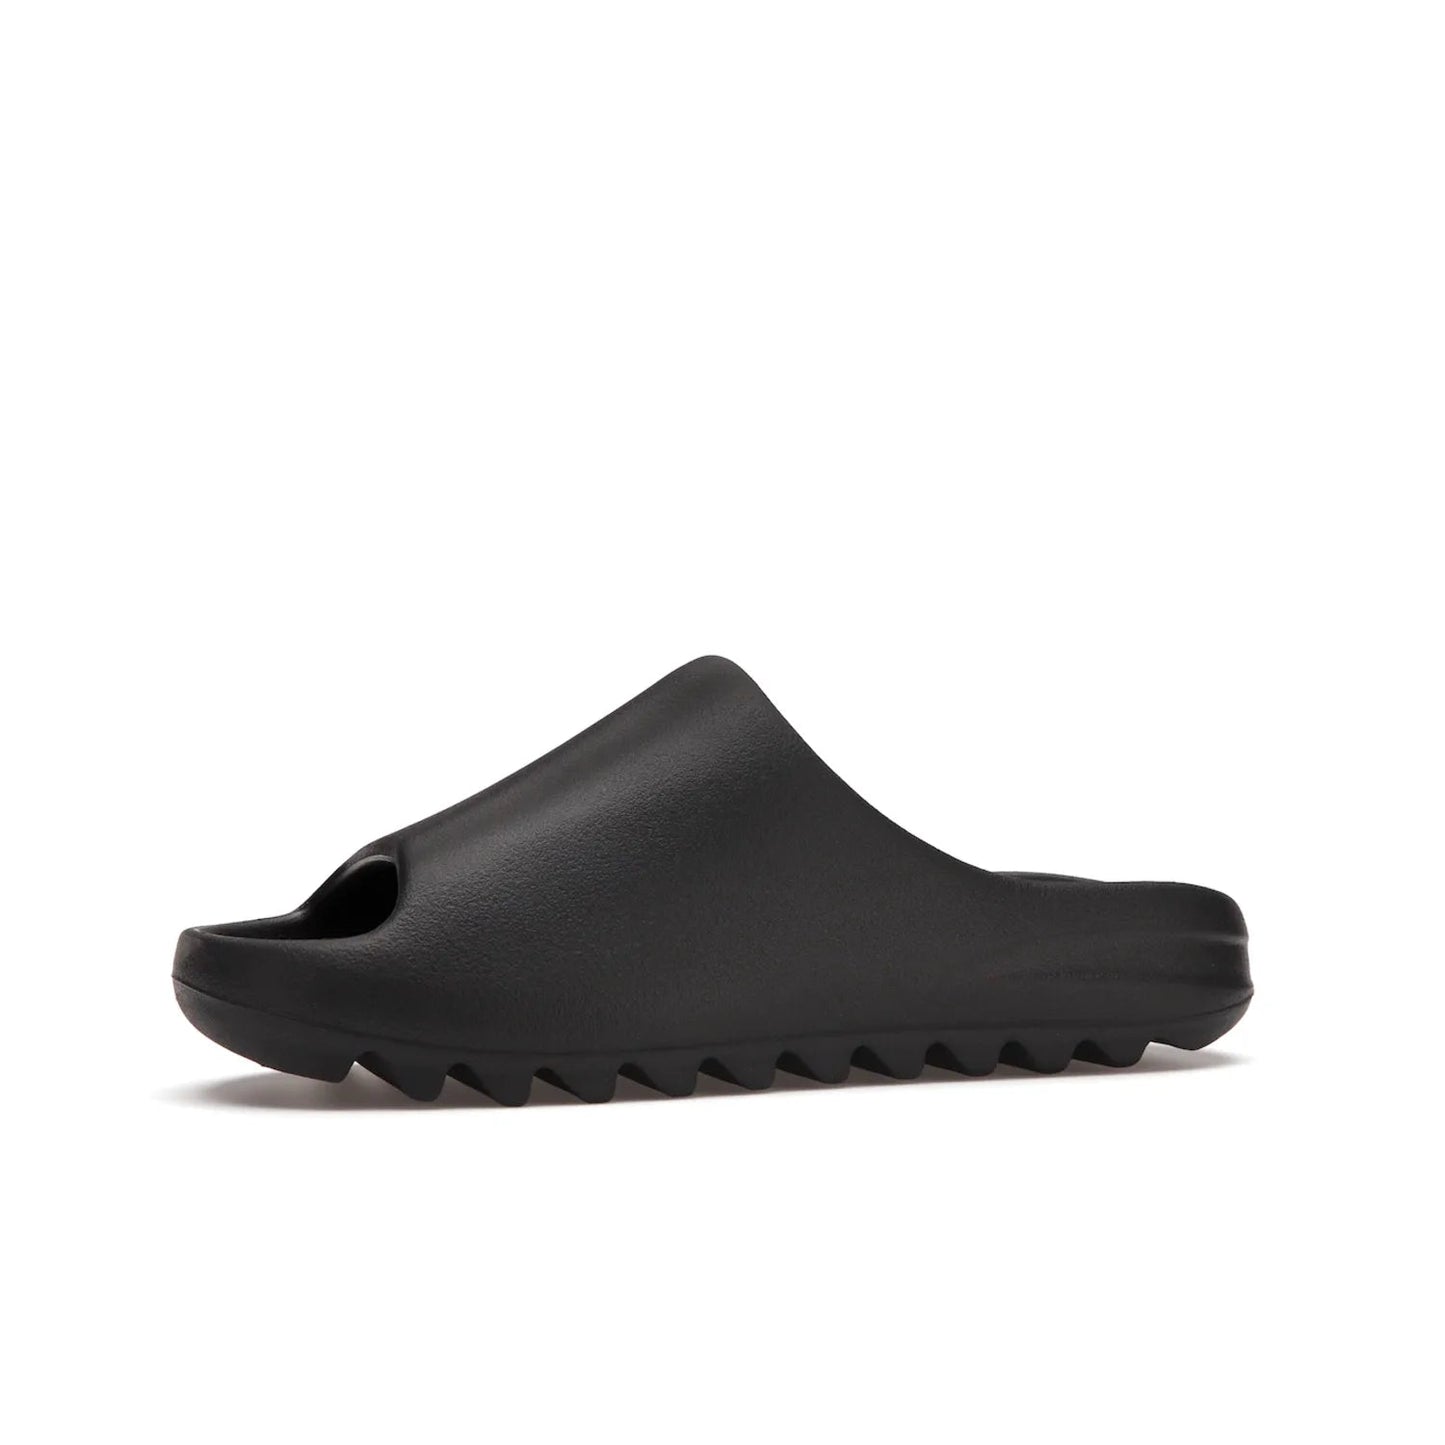 adidas Yeezy Slide Onyx - Image 17 - Only at www.BallersClubKickz.com - Step into comfort and style with the adidas Yeezy Slide Onyx. Featuring foam construction, an all-black colorway and a grooved outsole for stability and responsiveness, this versatile slide is a must-have for your collection.